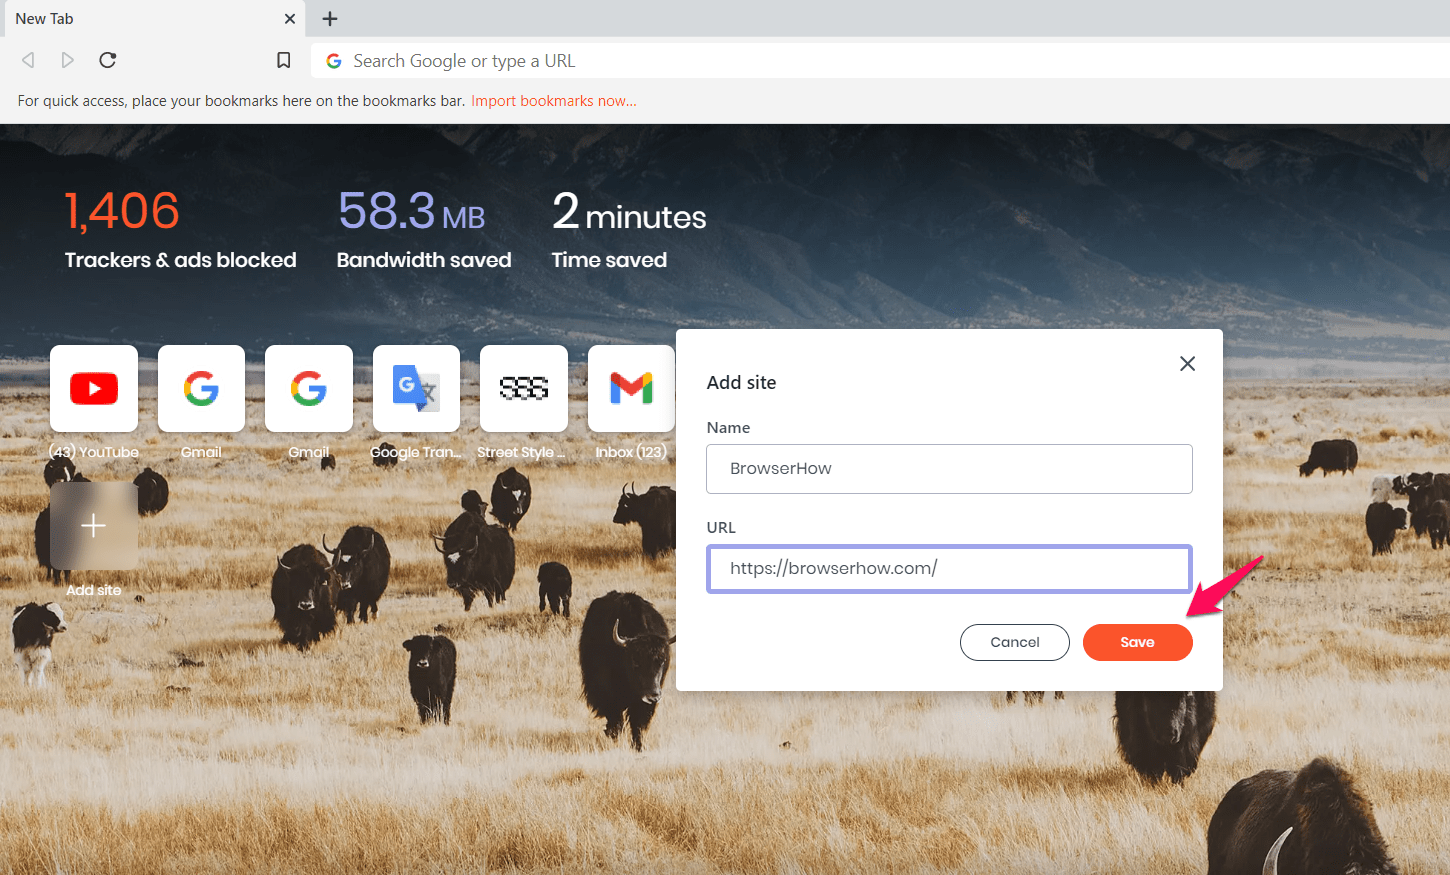 Add site pop-up window on Brave browser